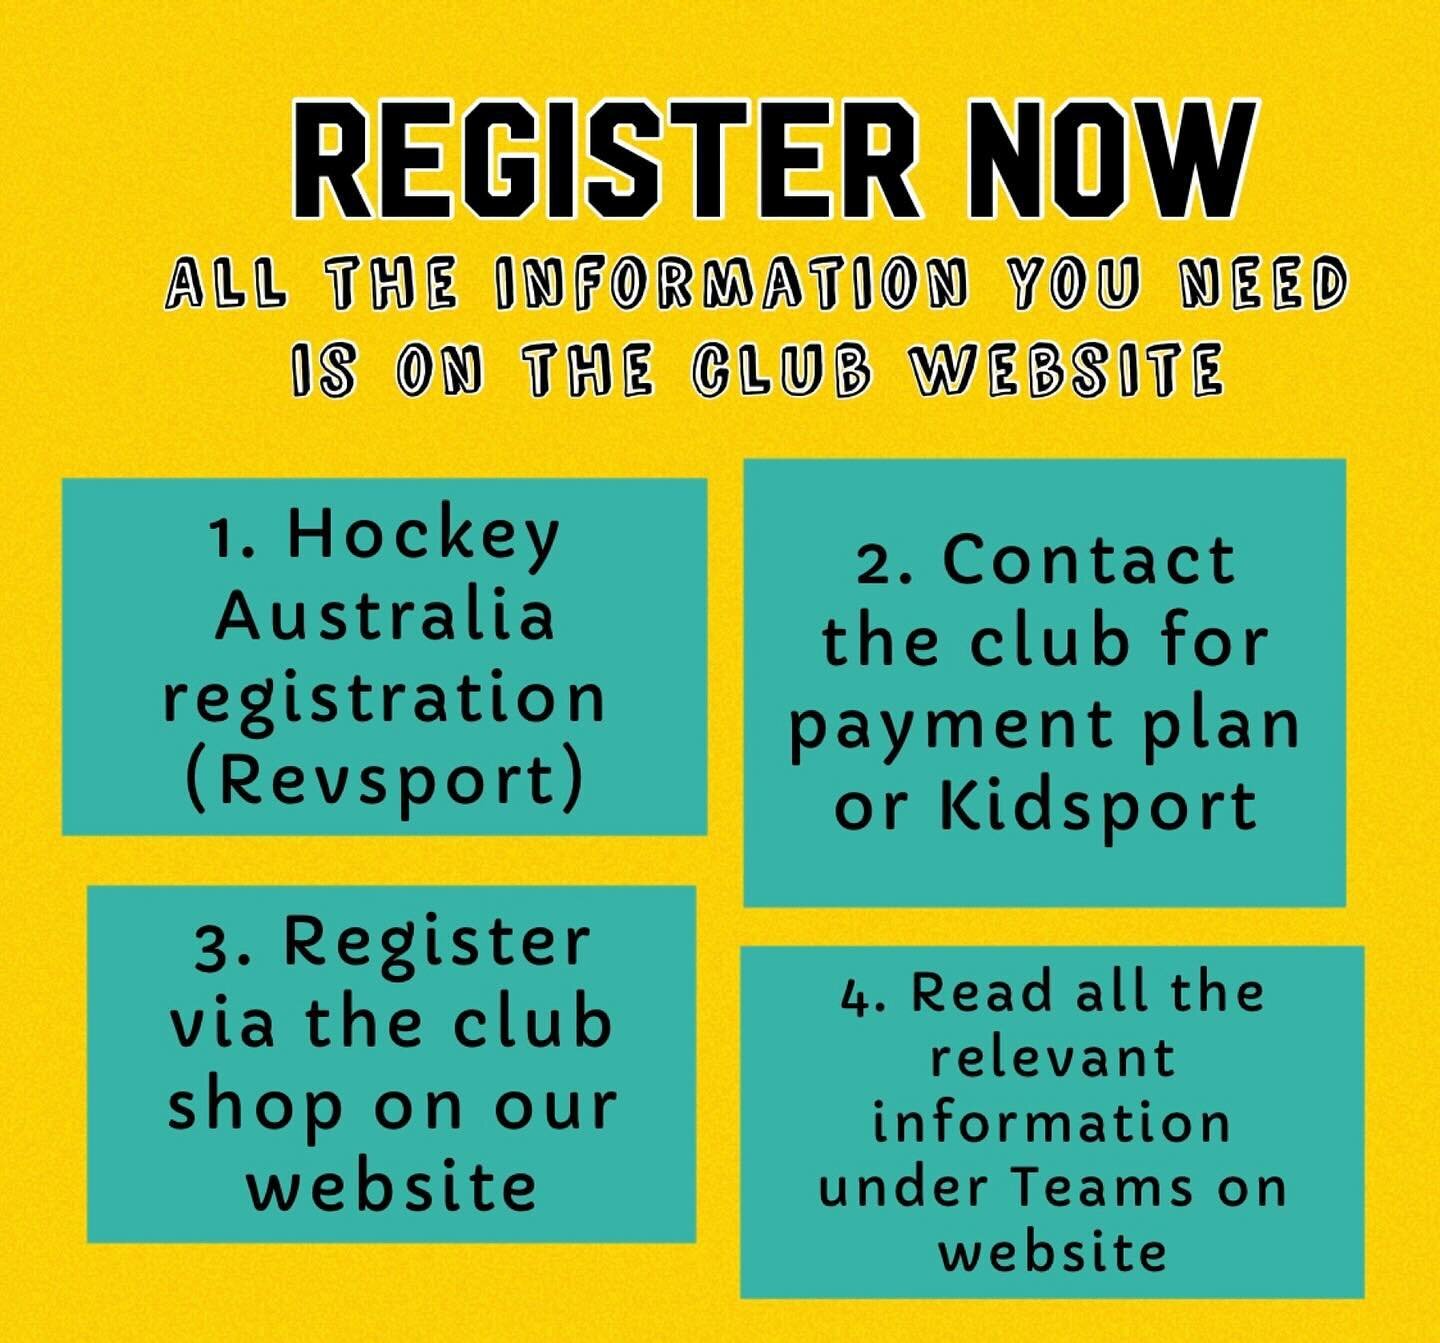 Let&rsquo;s get Season 2024 happening! Head to the club website to register today 
https://www.margaretriverhockey.org.au/register-to-play